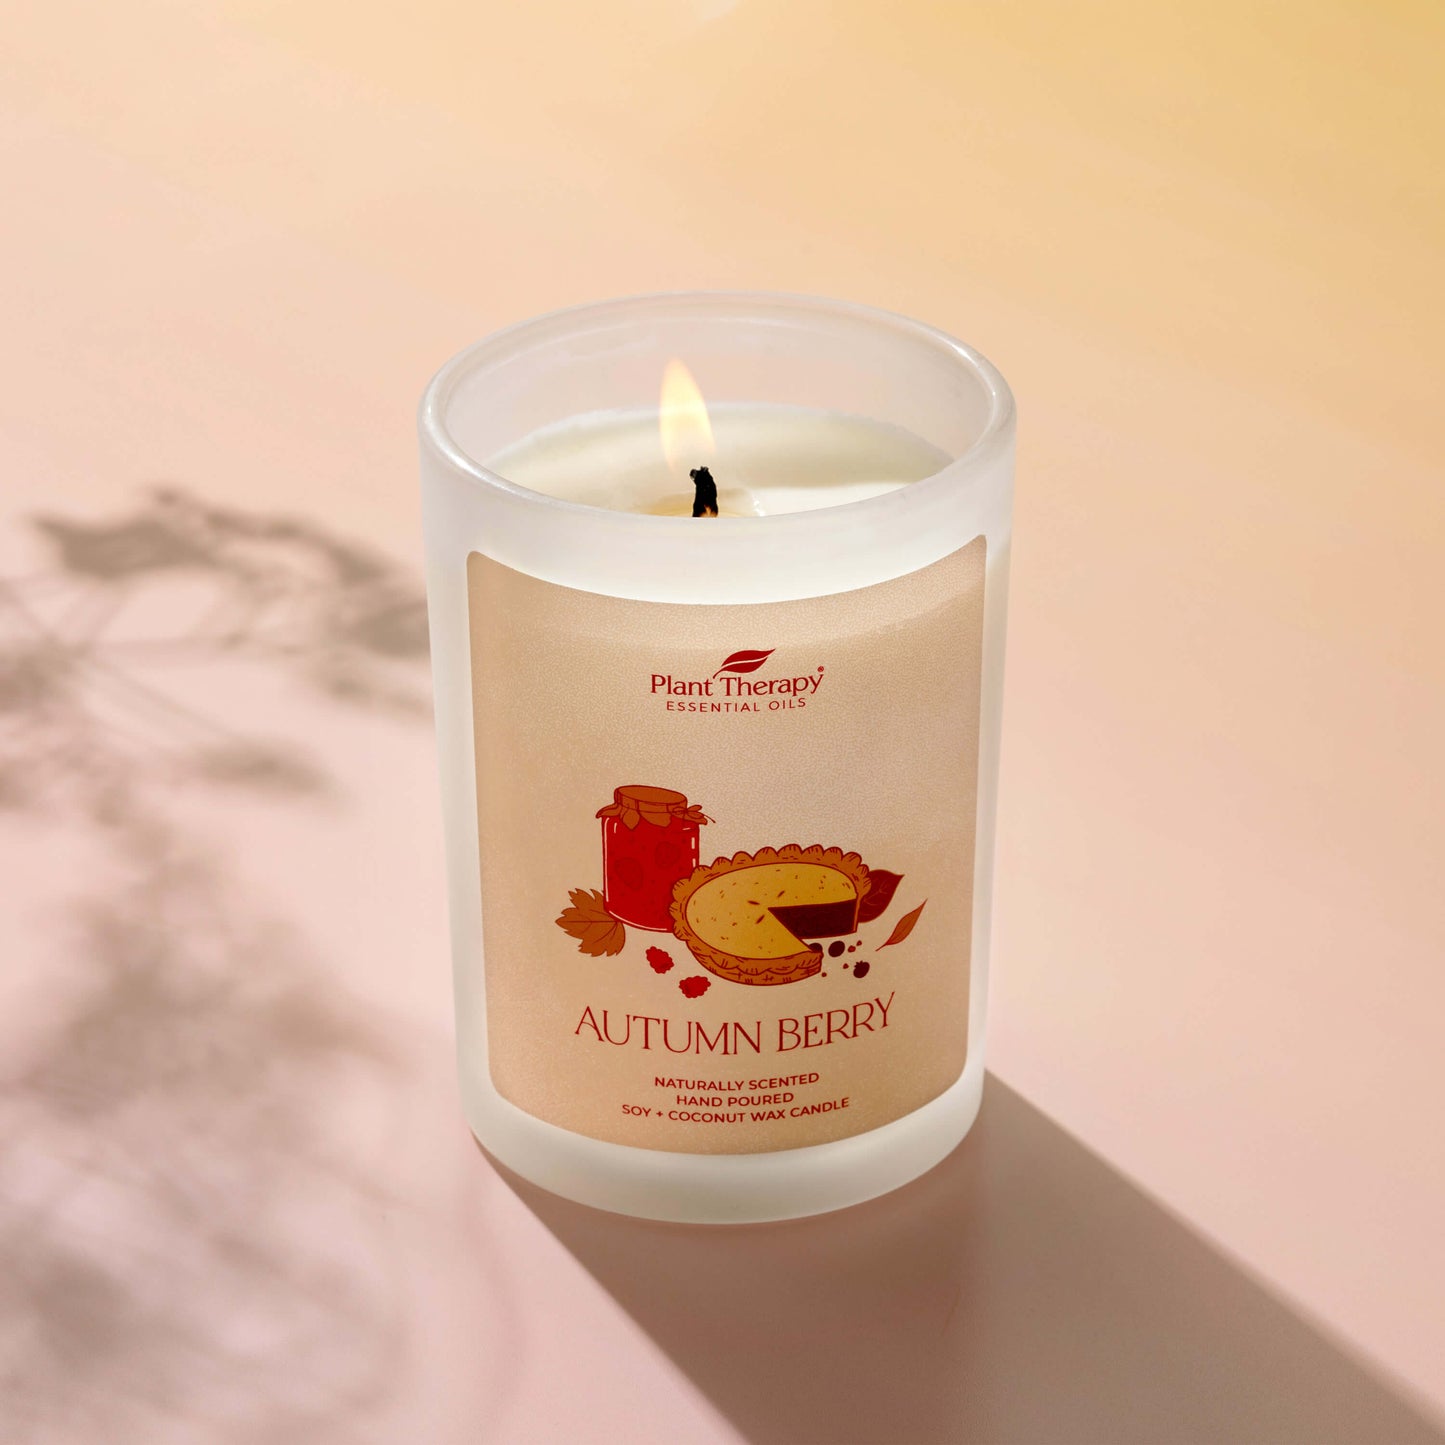 Autumn Berry Naturally Scented Candle